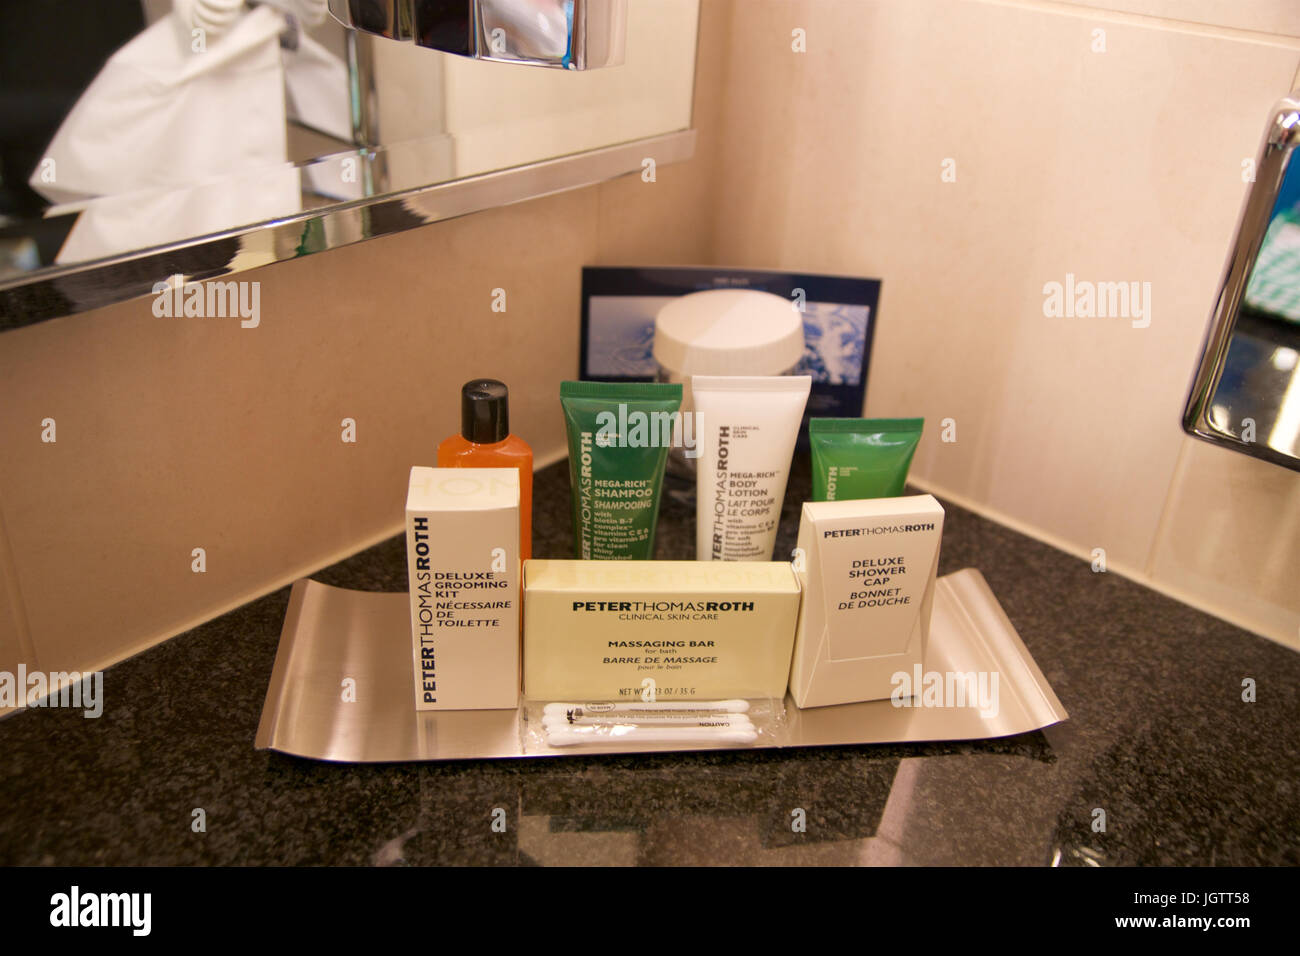 VIENNA, AUSTRIA - APR 28th, 2017: Hotel Amenities shower bath and soap, actual photography in hotel environment at a Penthouse Suite by Hilton Stock Photo